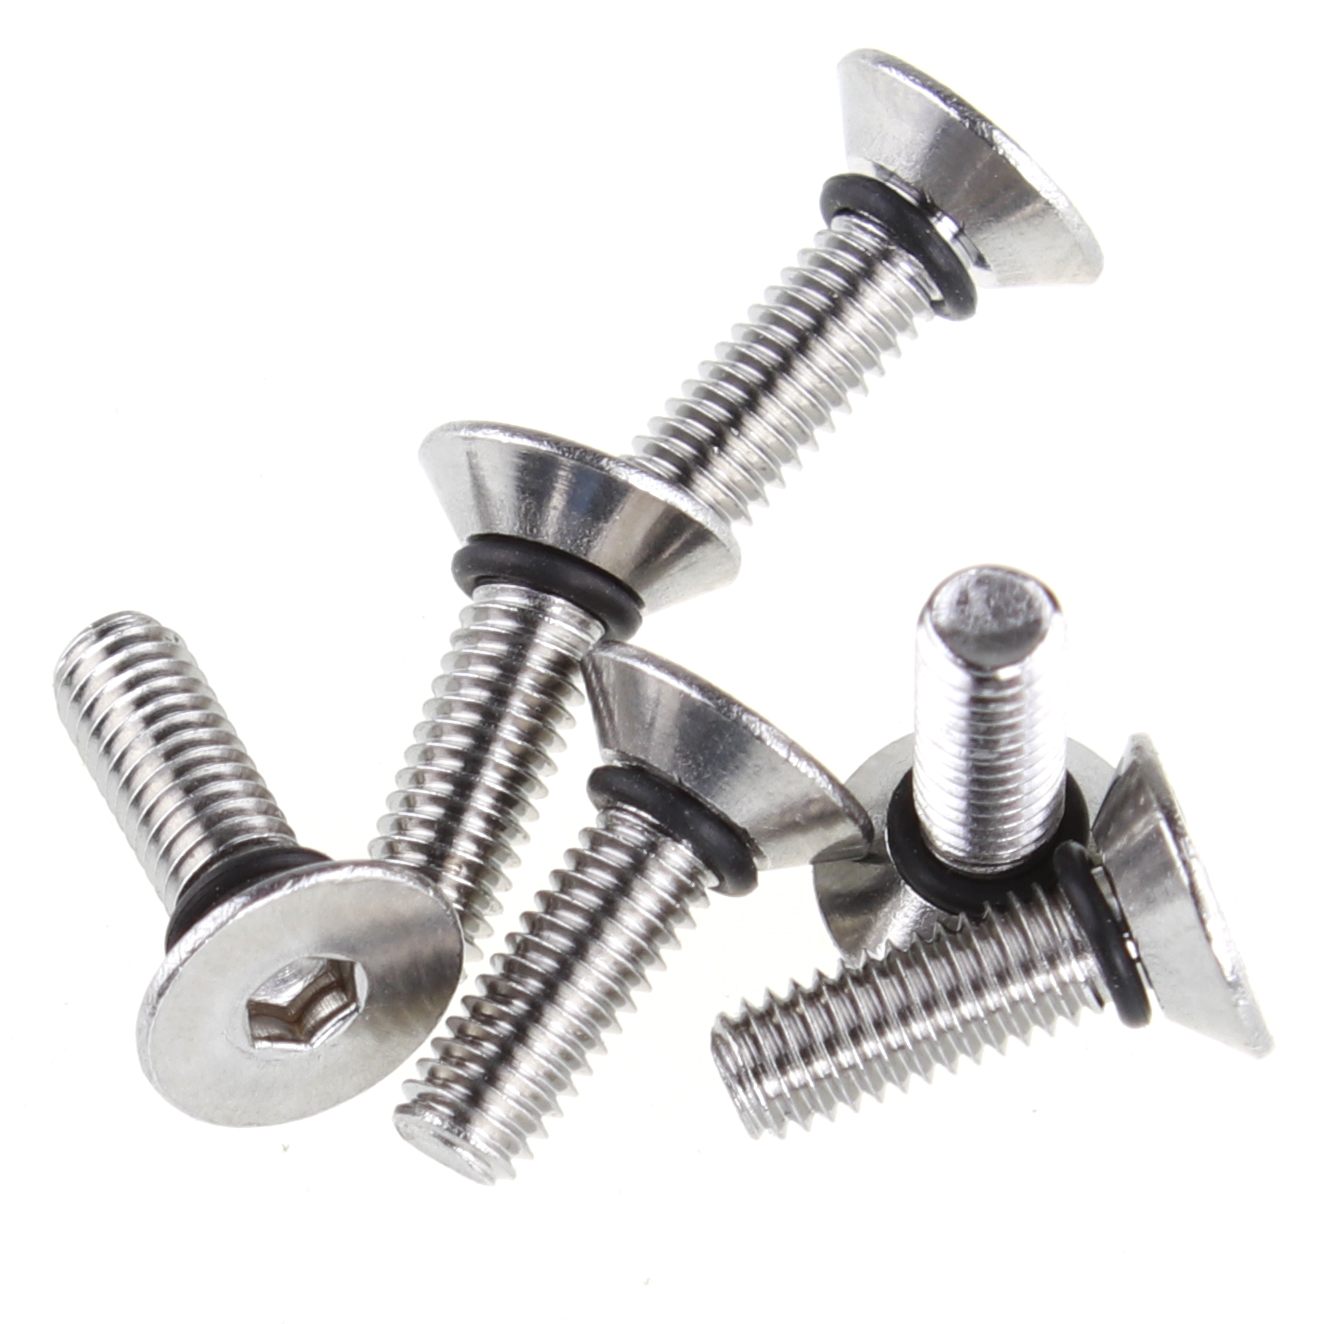 What is a sealing screw?